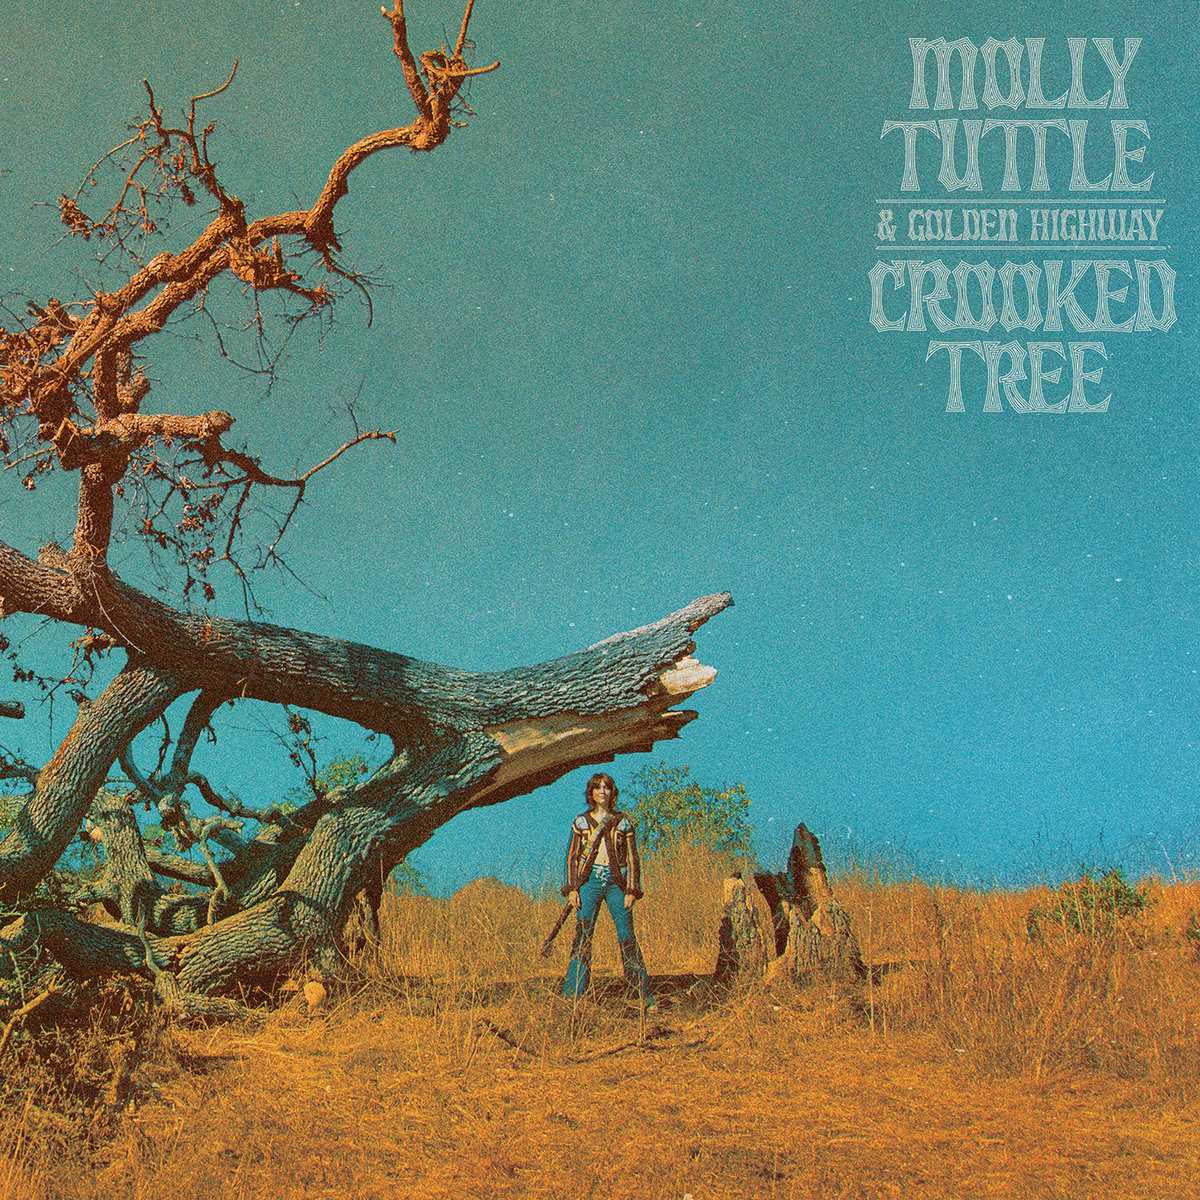 Molly Tuttle CROOKED TREE, cover album